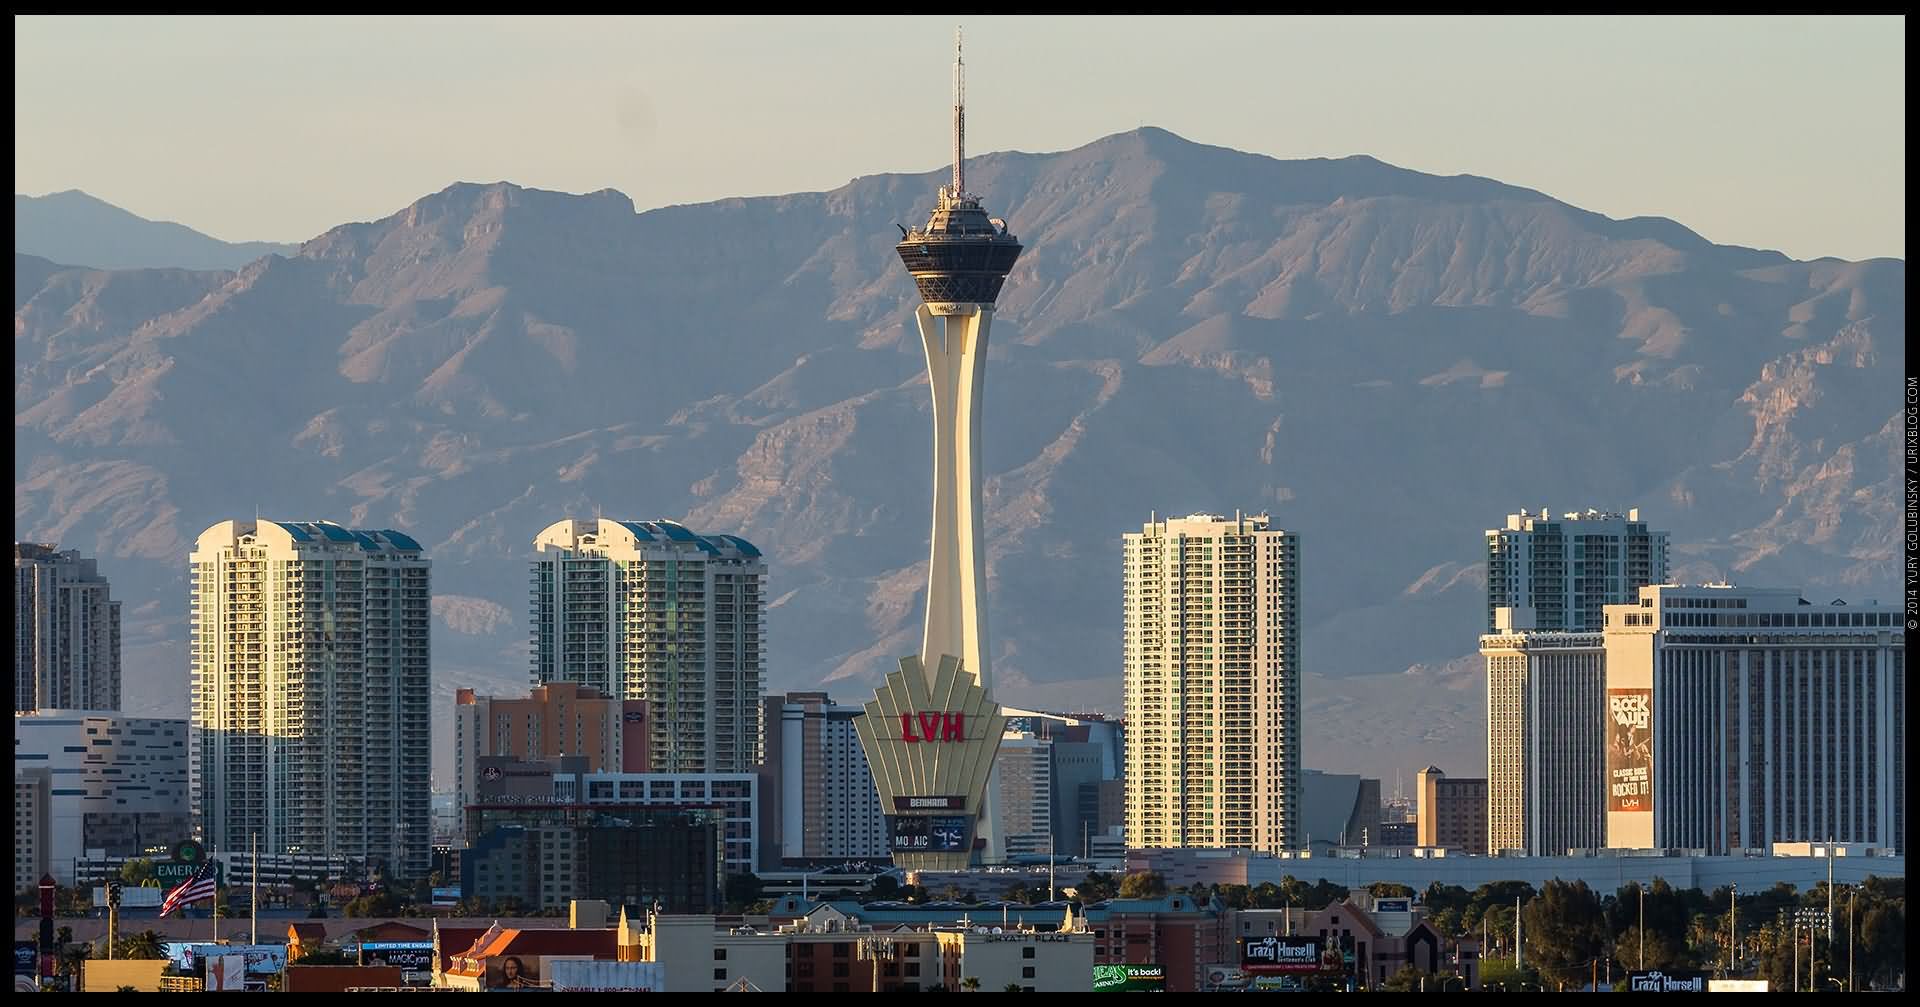 Stratosphere Tower With Surrounding Buildings In Las Vegas